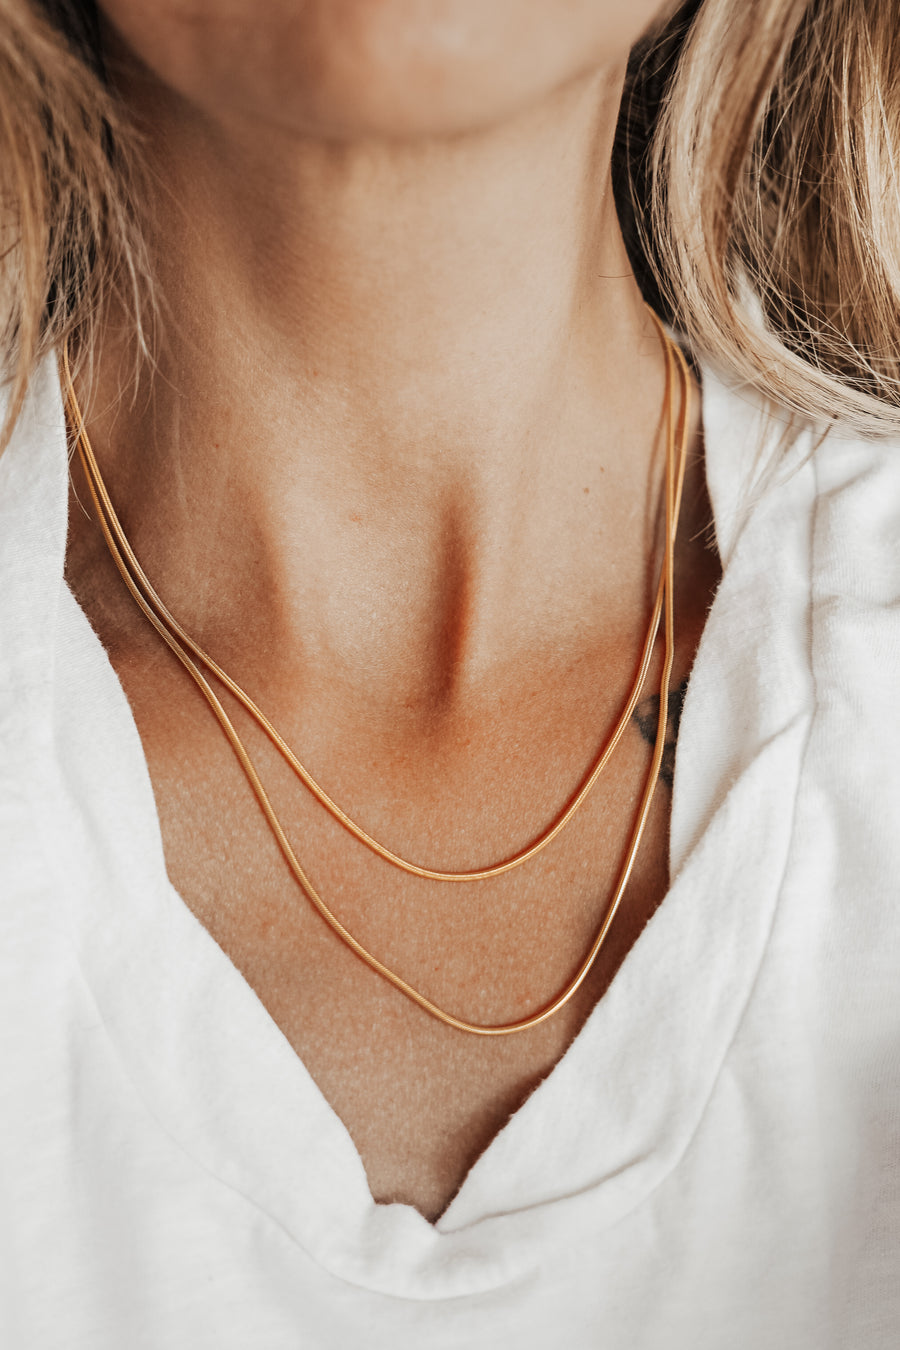 The Simplicity Chain in 14k Gold-Fill